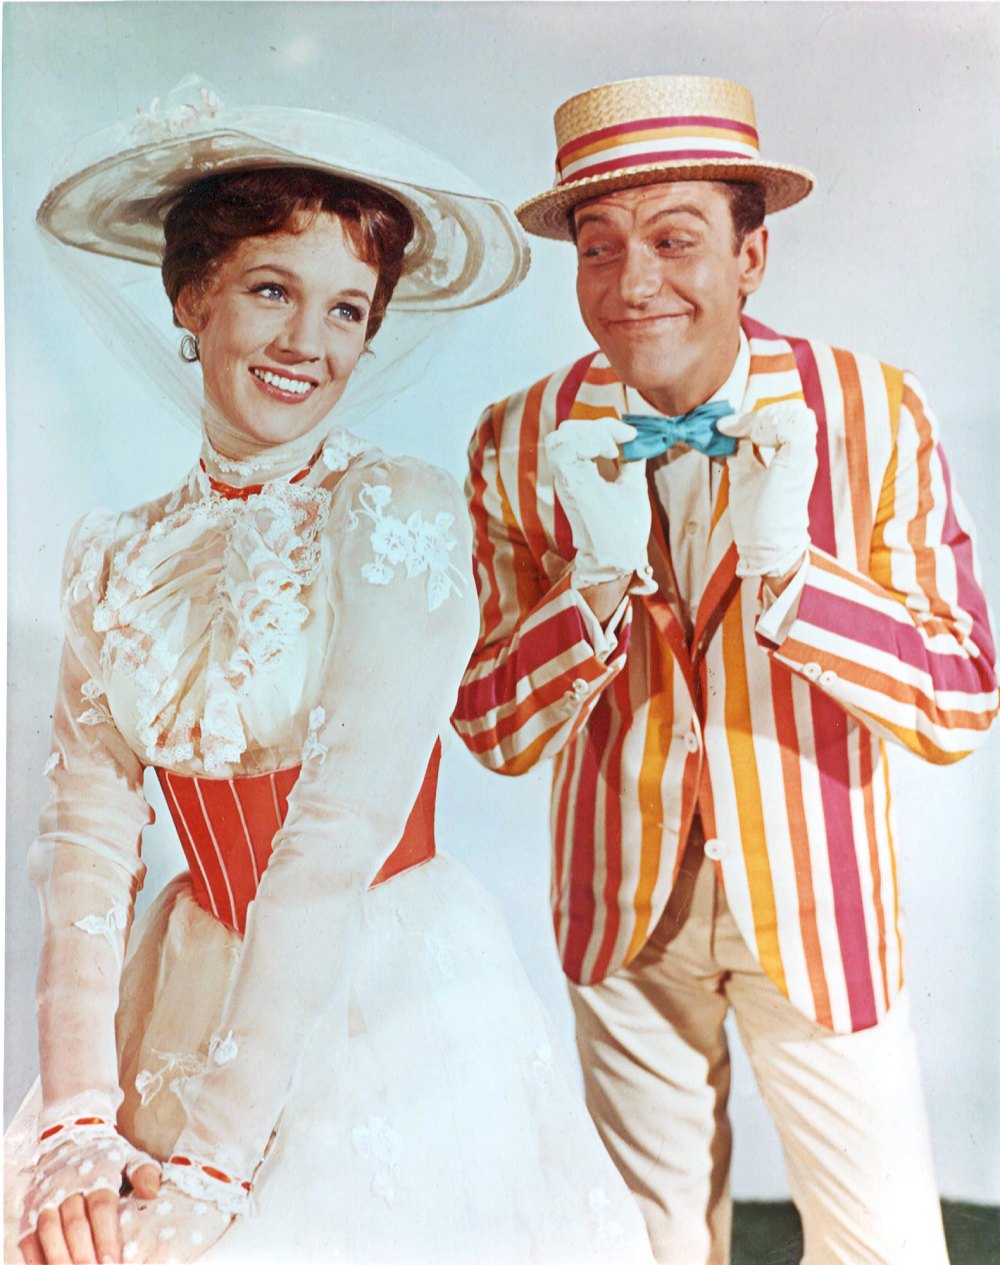 Dick Van Dyke Recalls Filming Mary Poppins With Julie Andrews